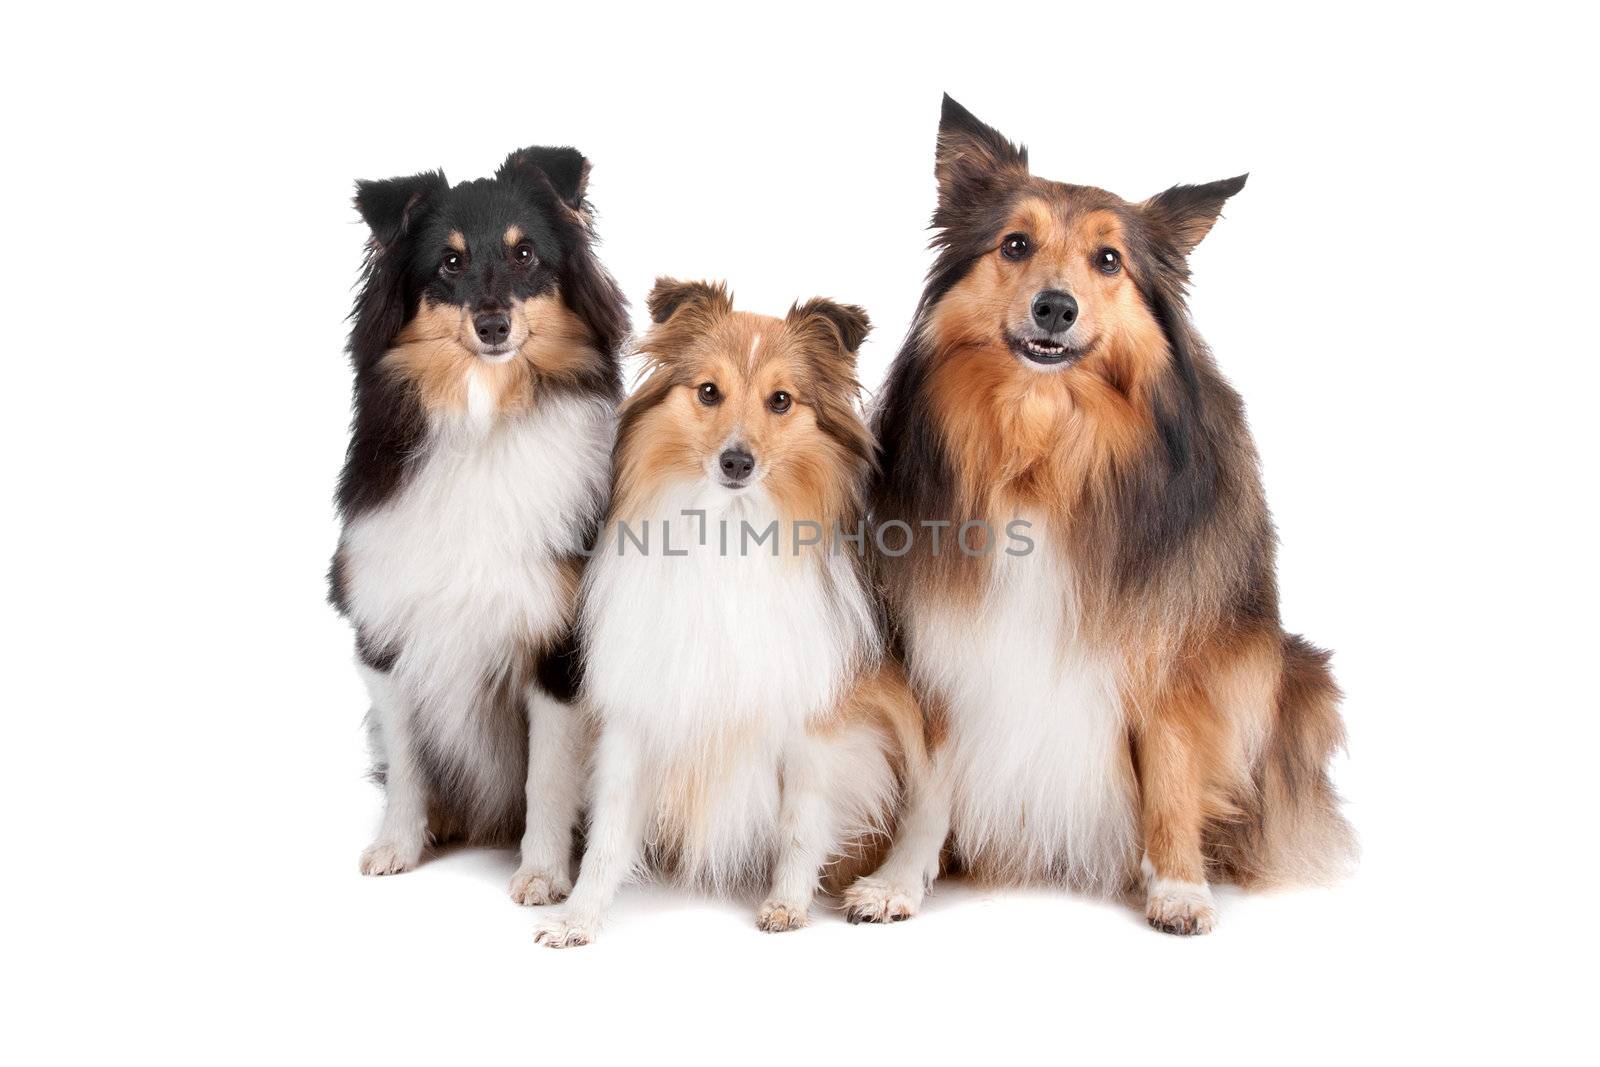 Group of three Shetland sheepdogs sitting and looking at camera(shelty) isolated on a white background